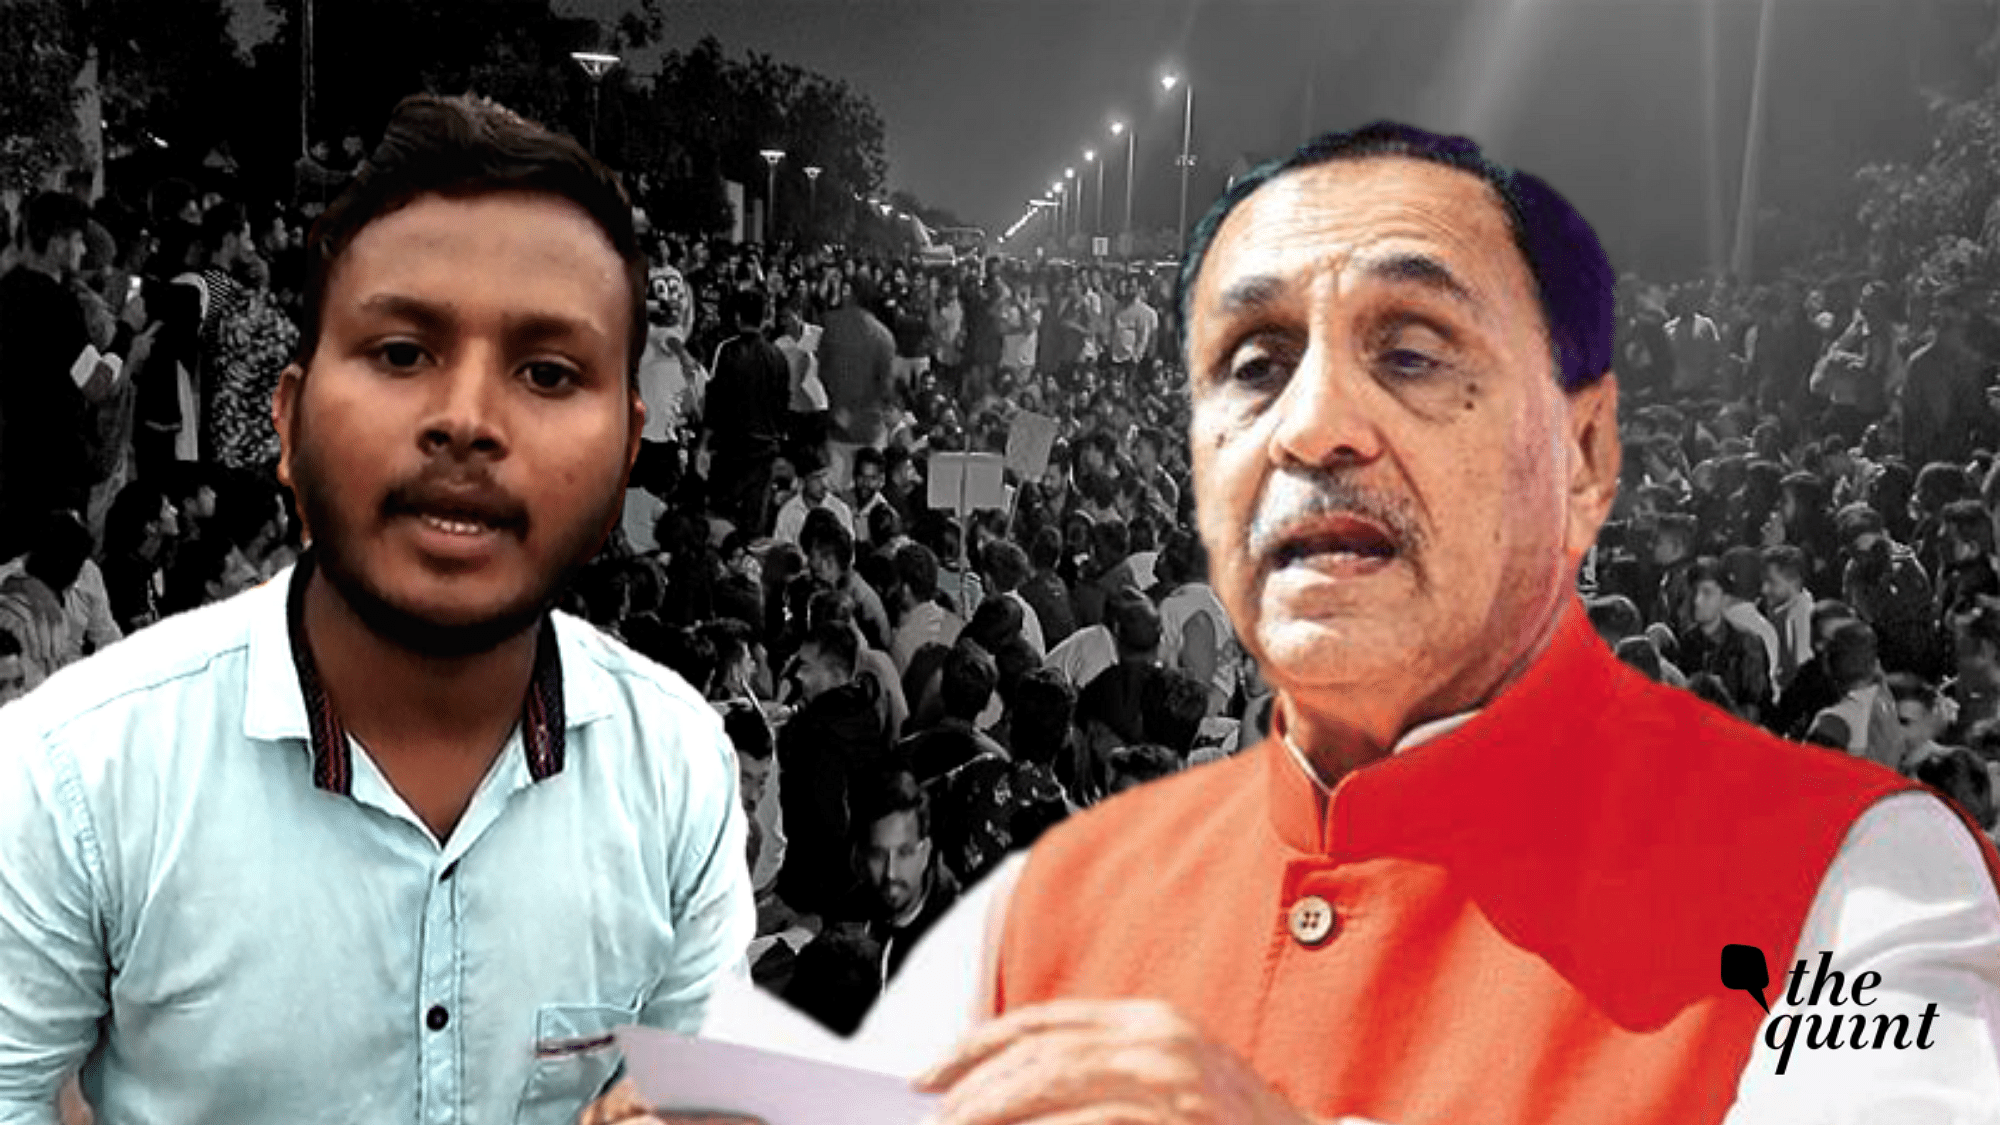 The agitation is underway in Gandhinagar and with political leaders like Jignesh Mevani and Hardik Patel joining the protest, Vijay Rupani’s BJP government is under pressure.